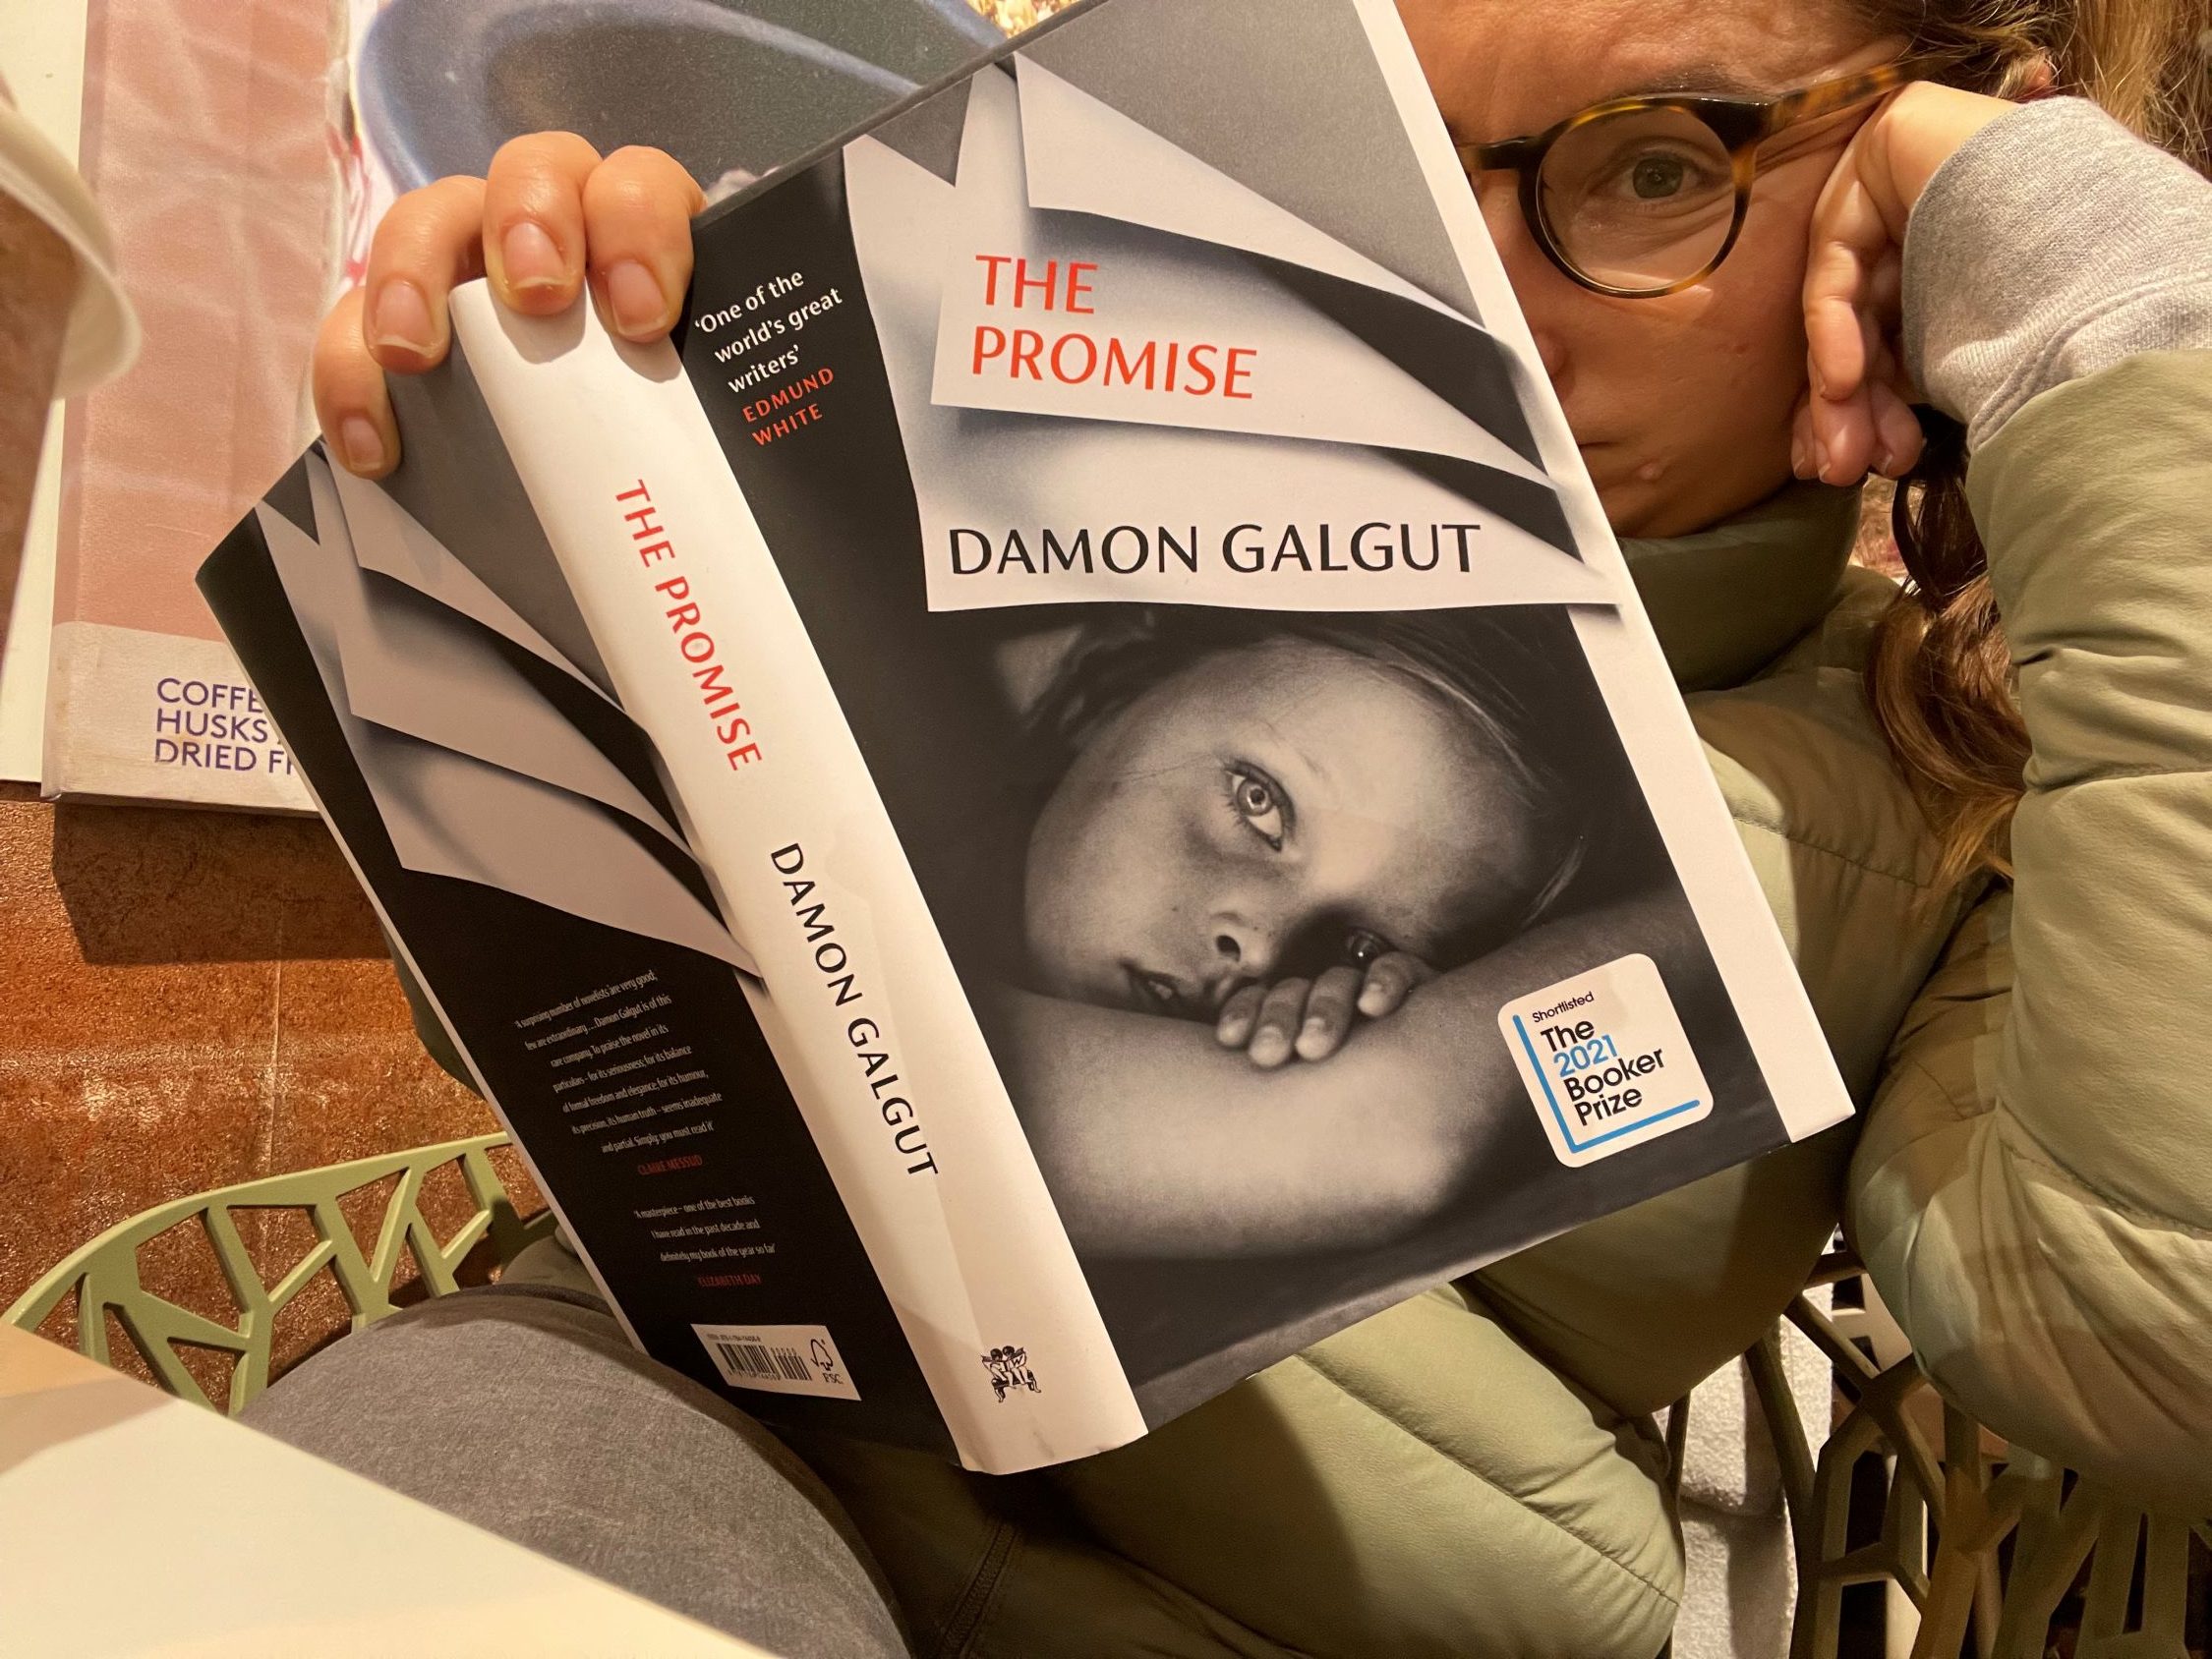 THE PROMISE by Damon Galgut